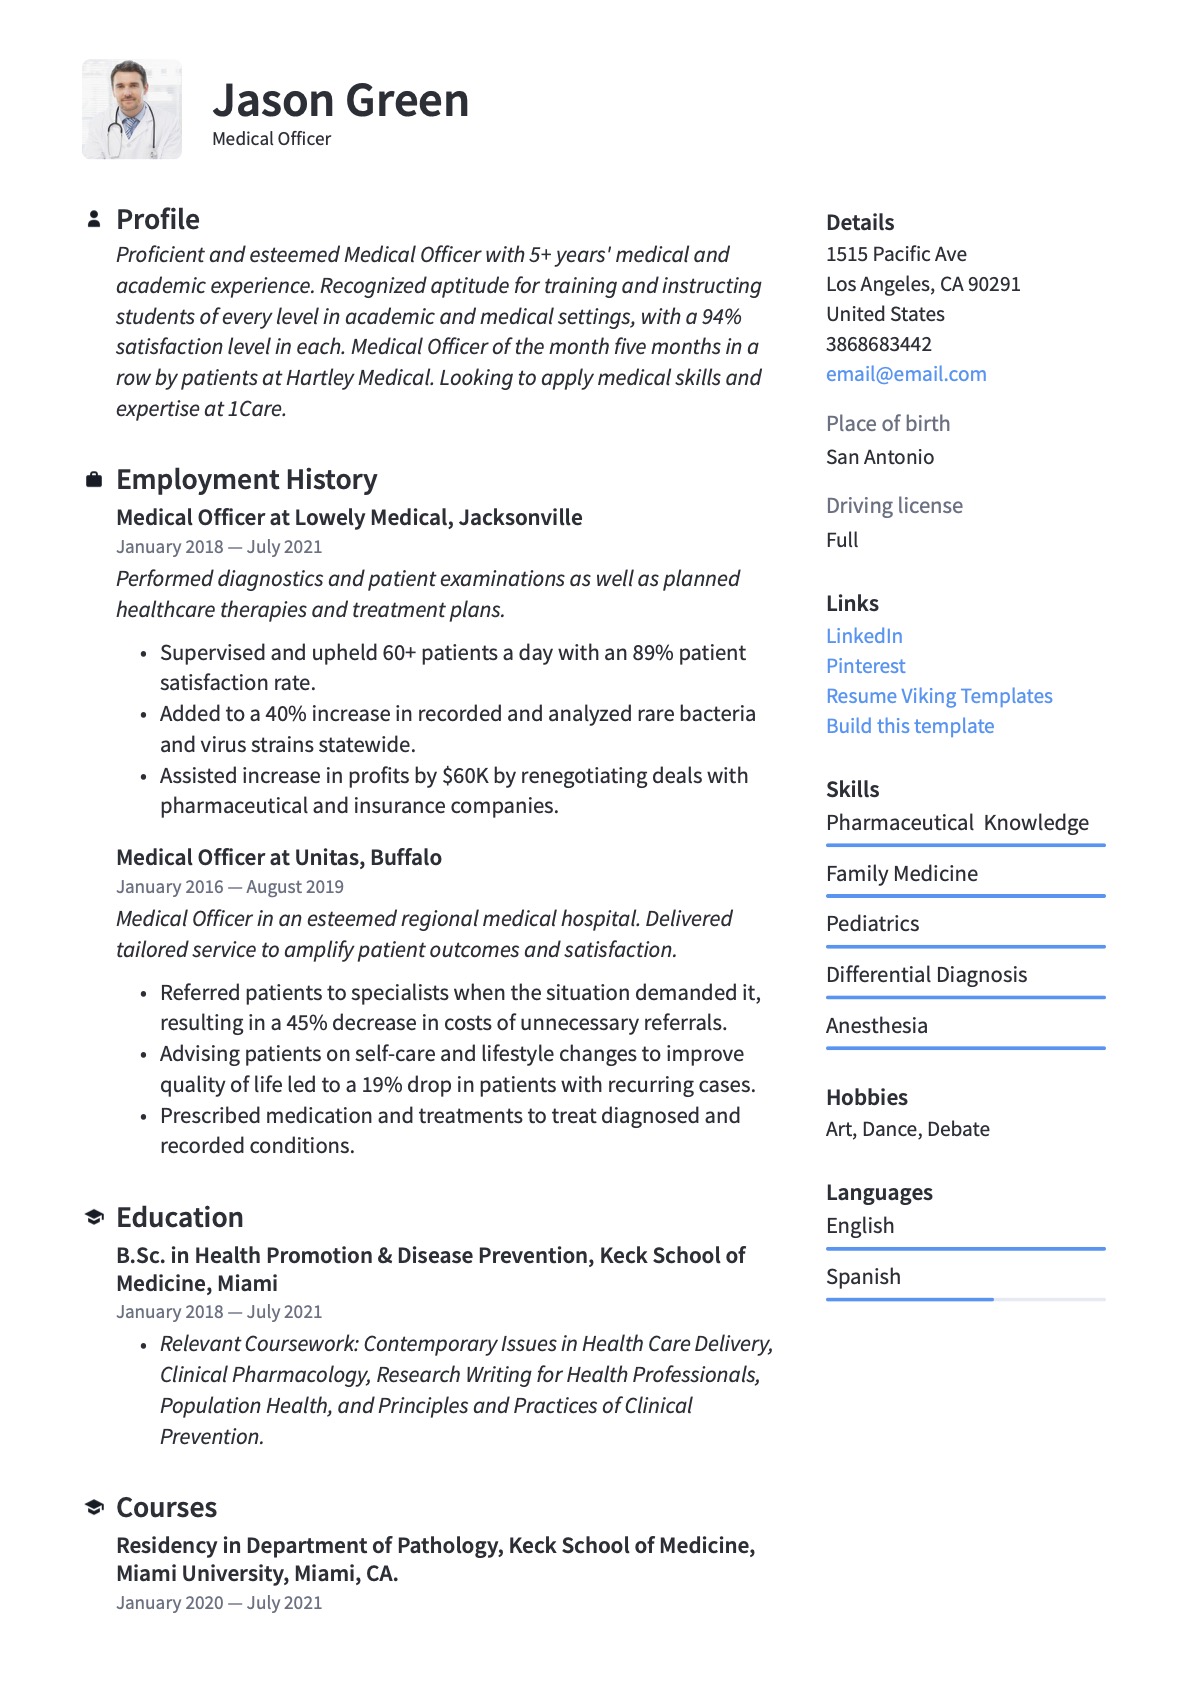 Professional Medical Officer Resume Template